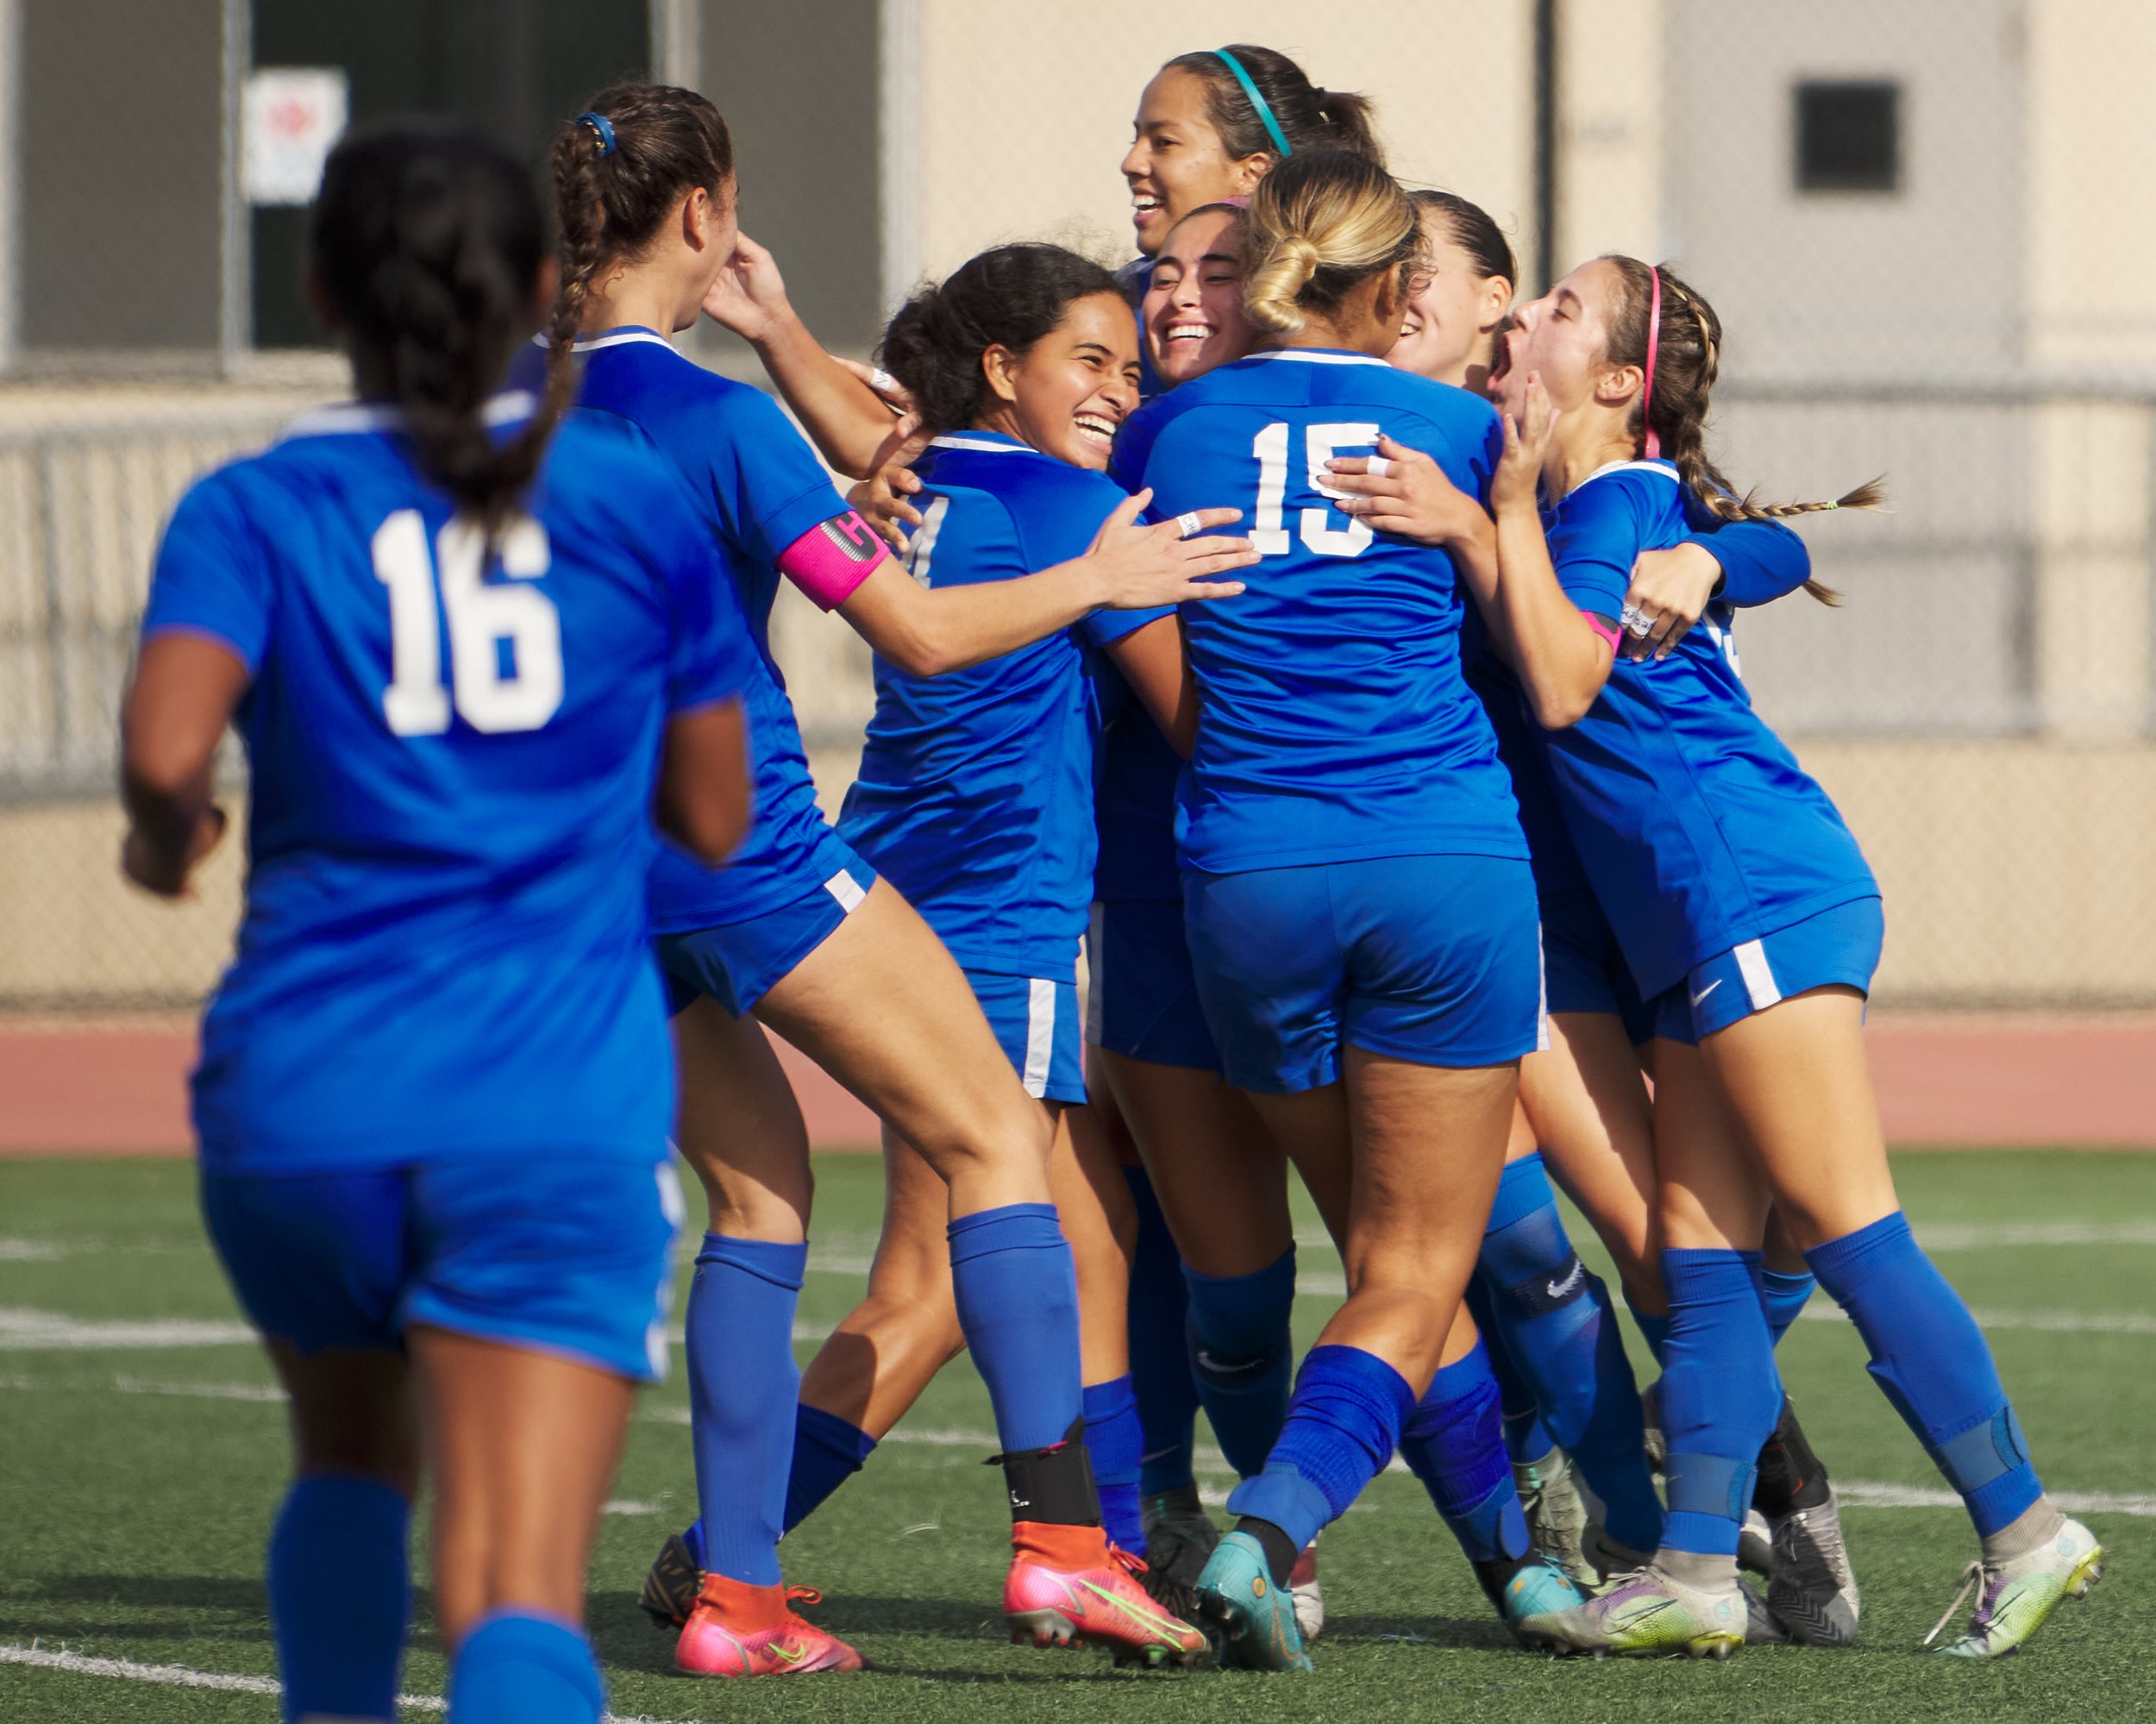  Members of the Santa Monica College Corsairs Women's Soccer team celebrate celebrate Jacky Hernandez' (15) unassisted goal during the match against the Bakersfield College Renegades on Friday, Oct. 20, 2022, at Corsair Field in Santa Monica, Calif. 